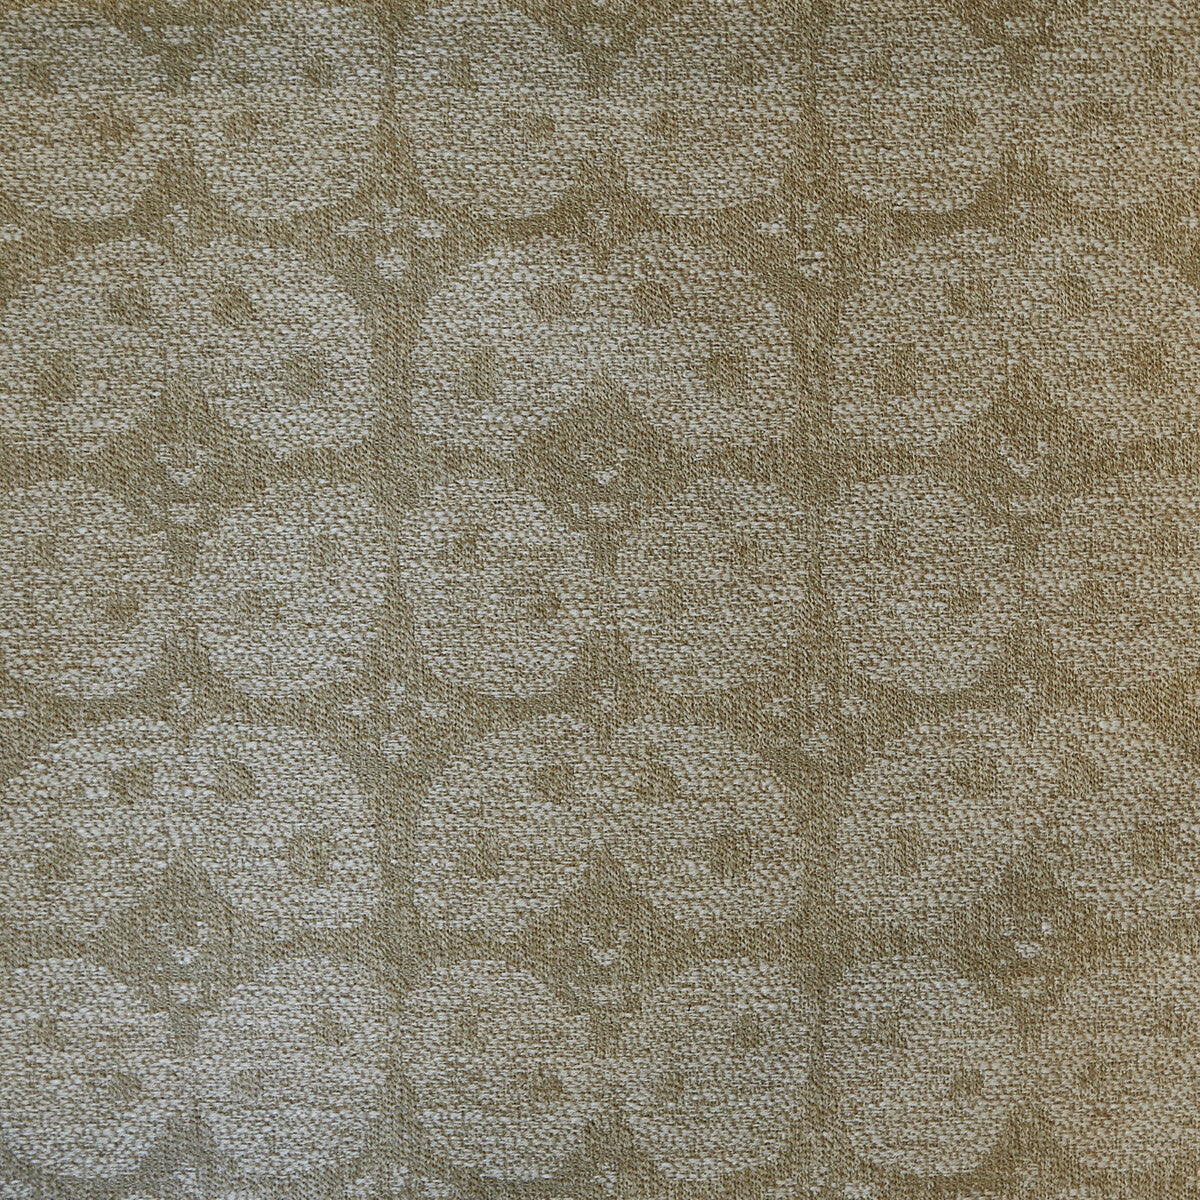 Panarea fabric in natural color - pattern GWF-3201.16.0 - by Lee Jofa Modern in the Allegra Hicks Islands collection